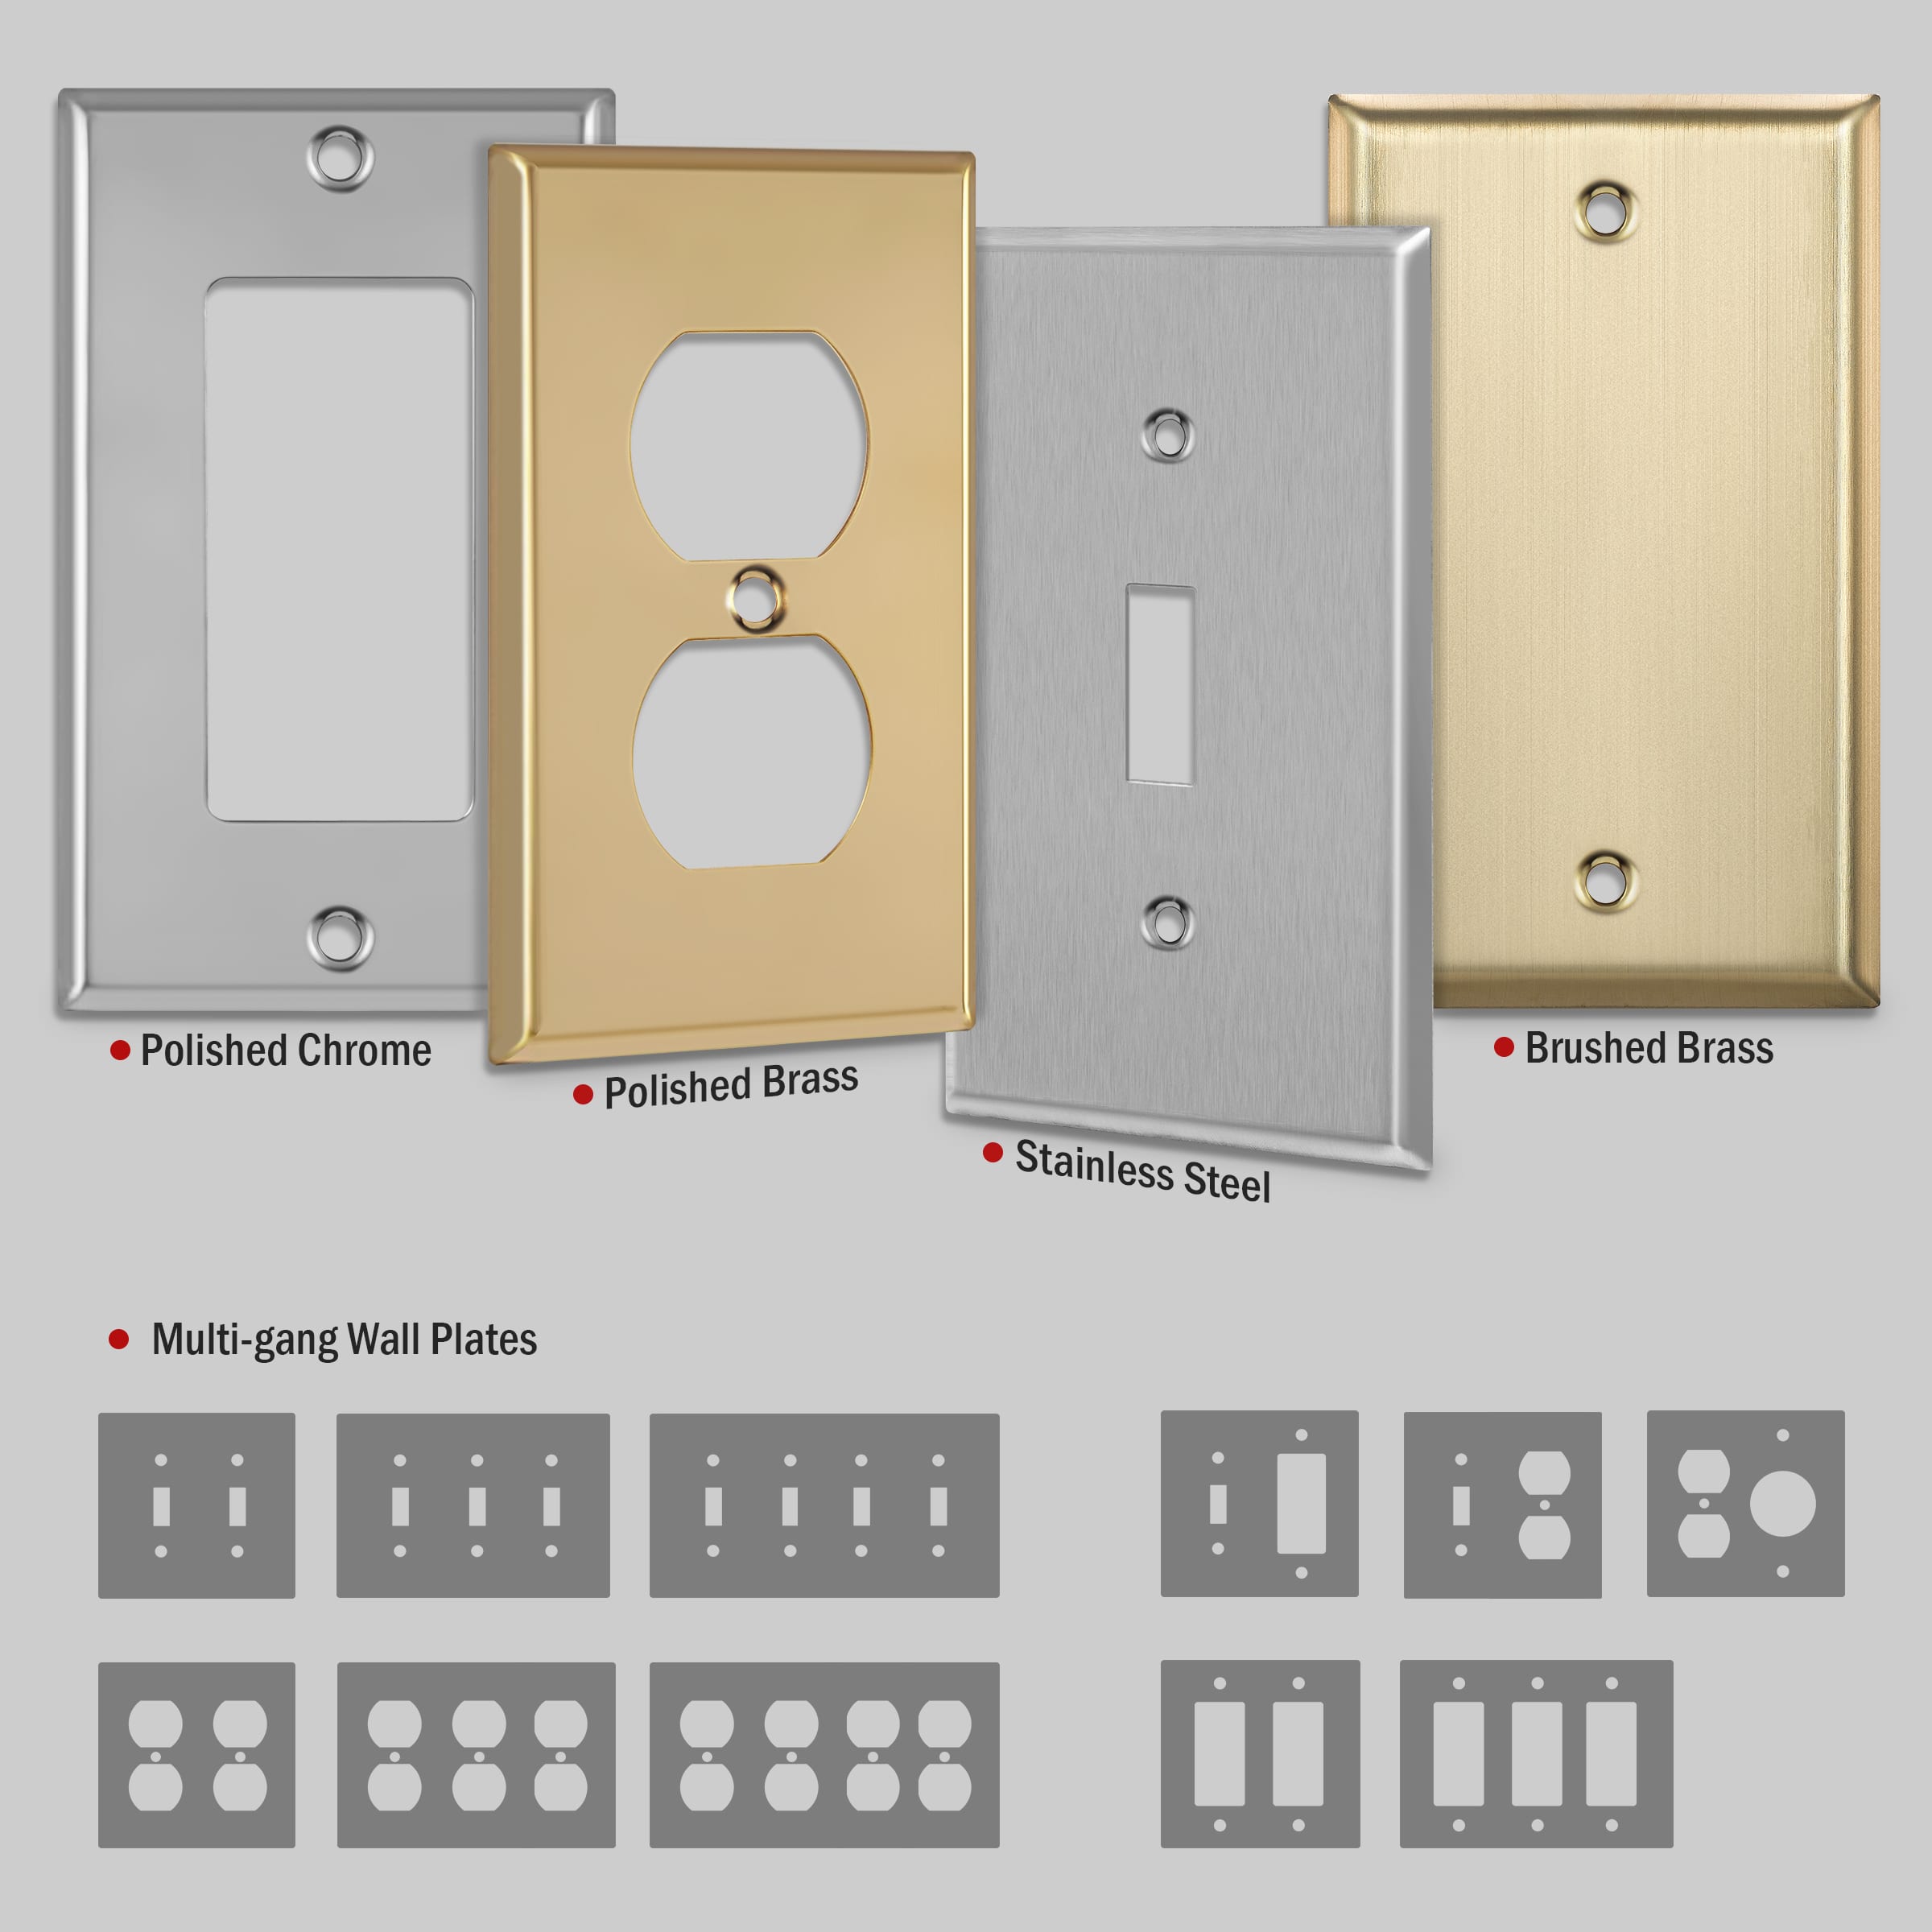 2-Gang Stainless Steel Duplex Outlet Wall Plate